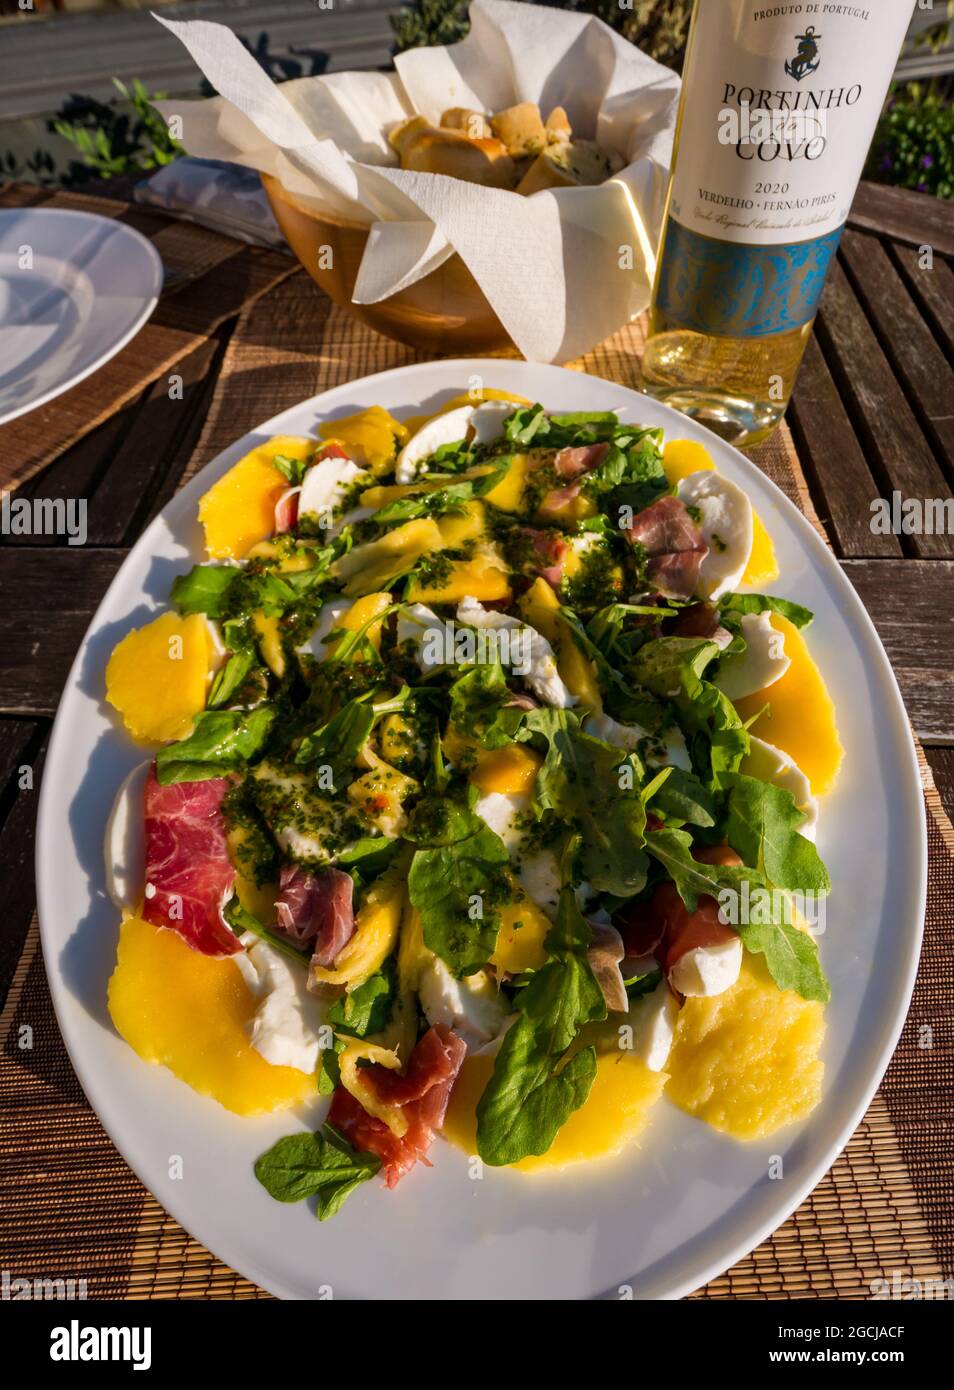 Summer salad platter with mango, prosciutto, basil & mozzarella cheese outdoors in sunshine with garlic bread and white wine bottle Stock Photo